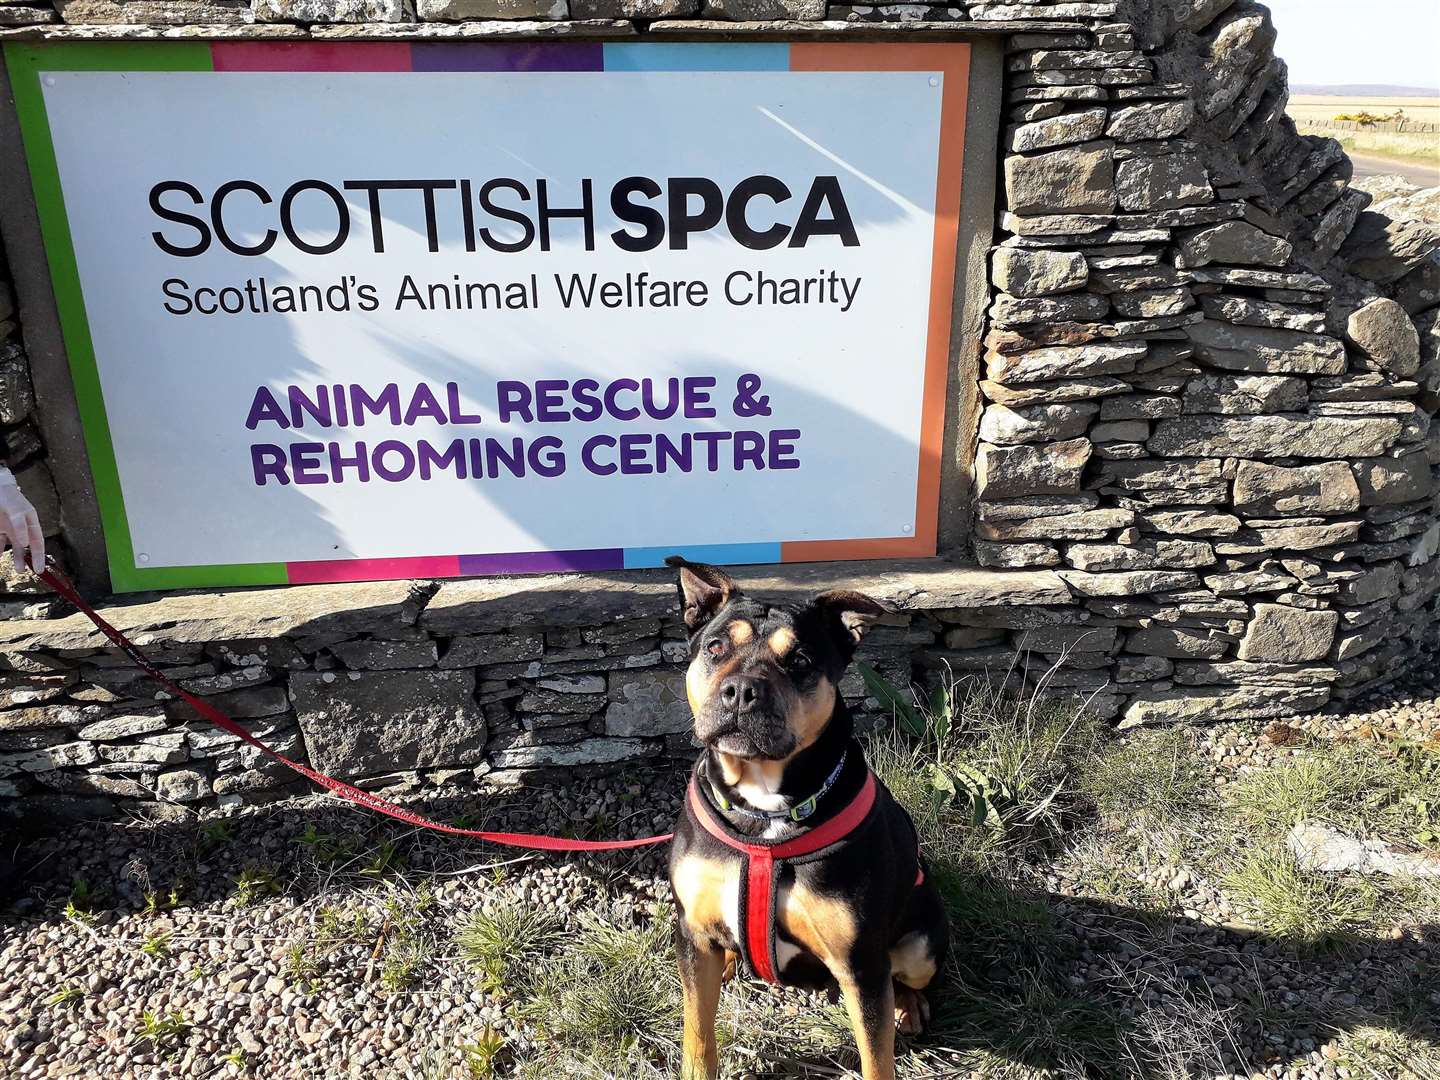 £500 has been donated to the local rescue centre.